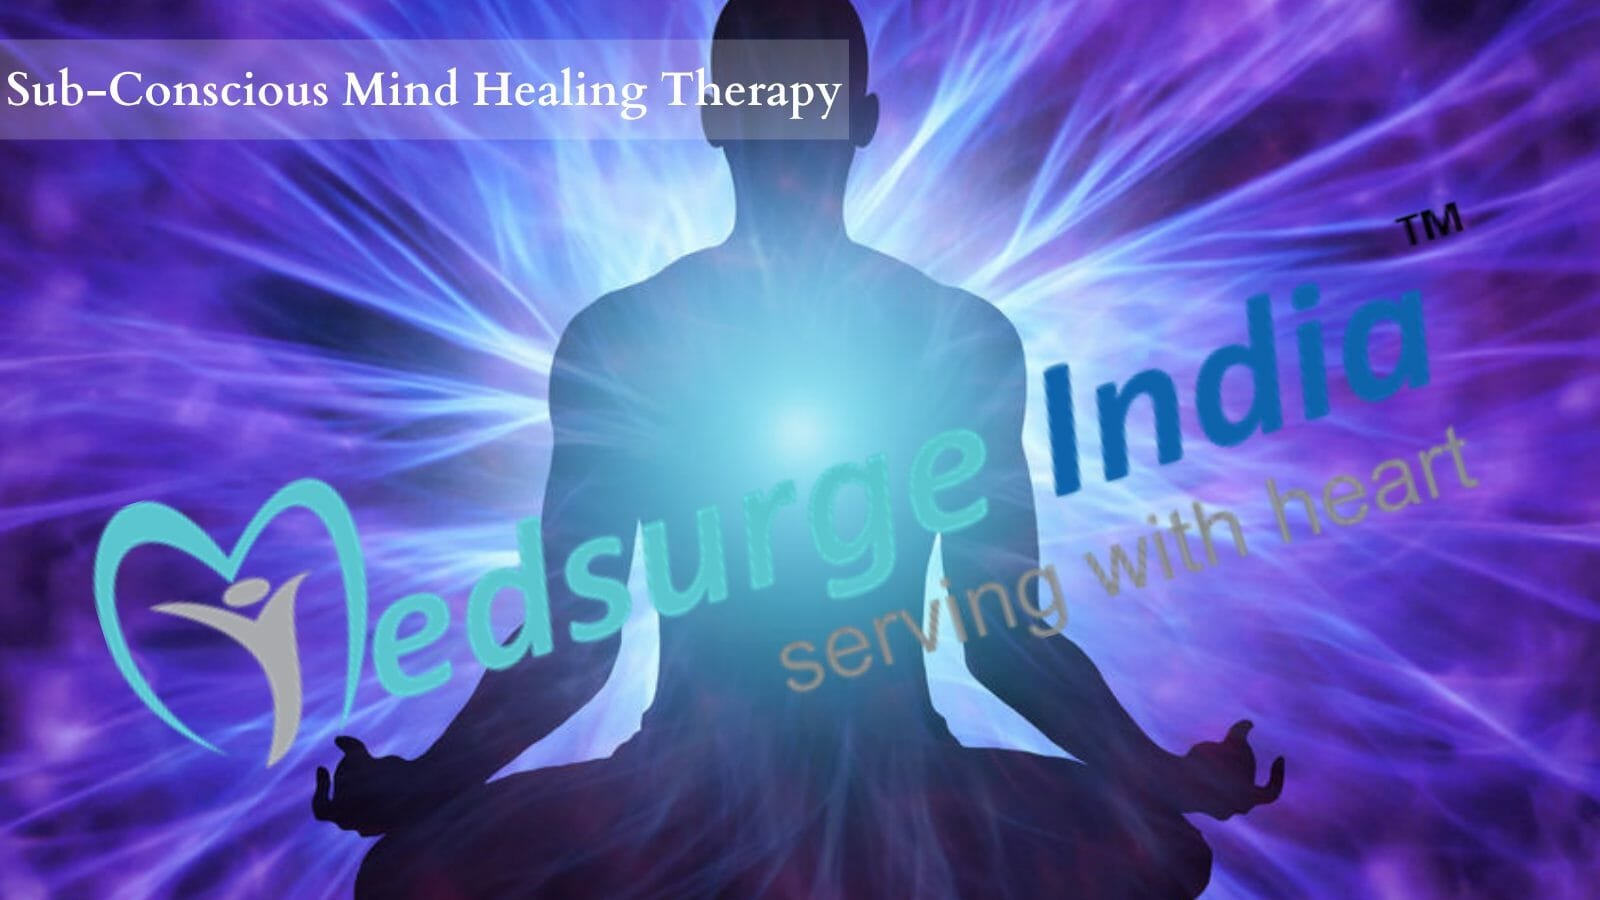 Sub-Conscious-Mind-Healing-Therapy